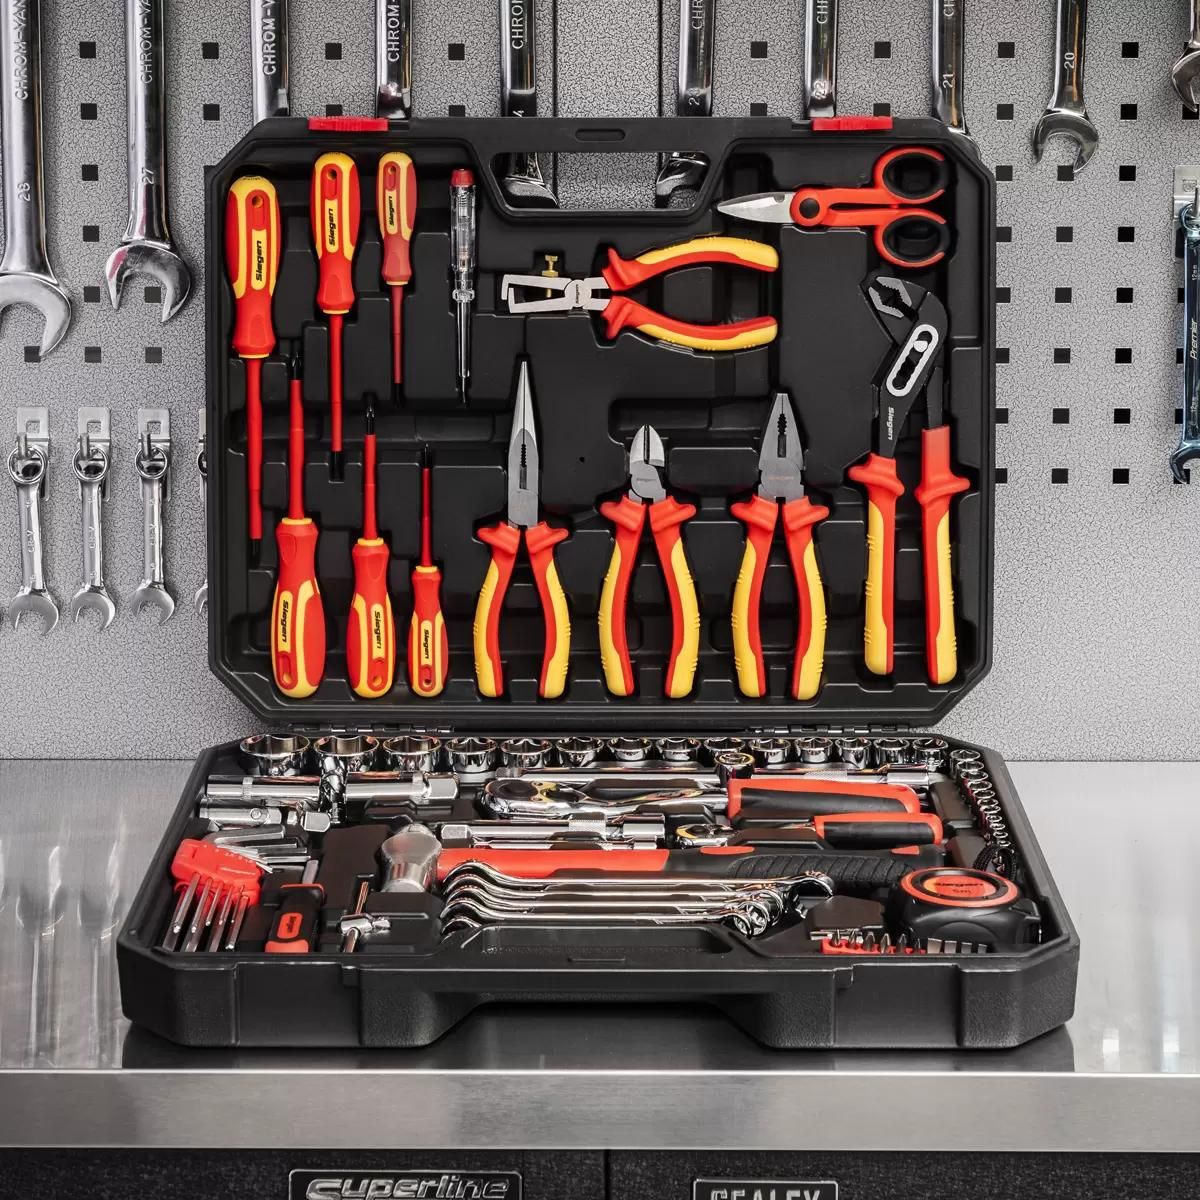 Sealey S01217 Electrician's Tool Kit 90 Pieces